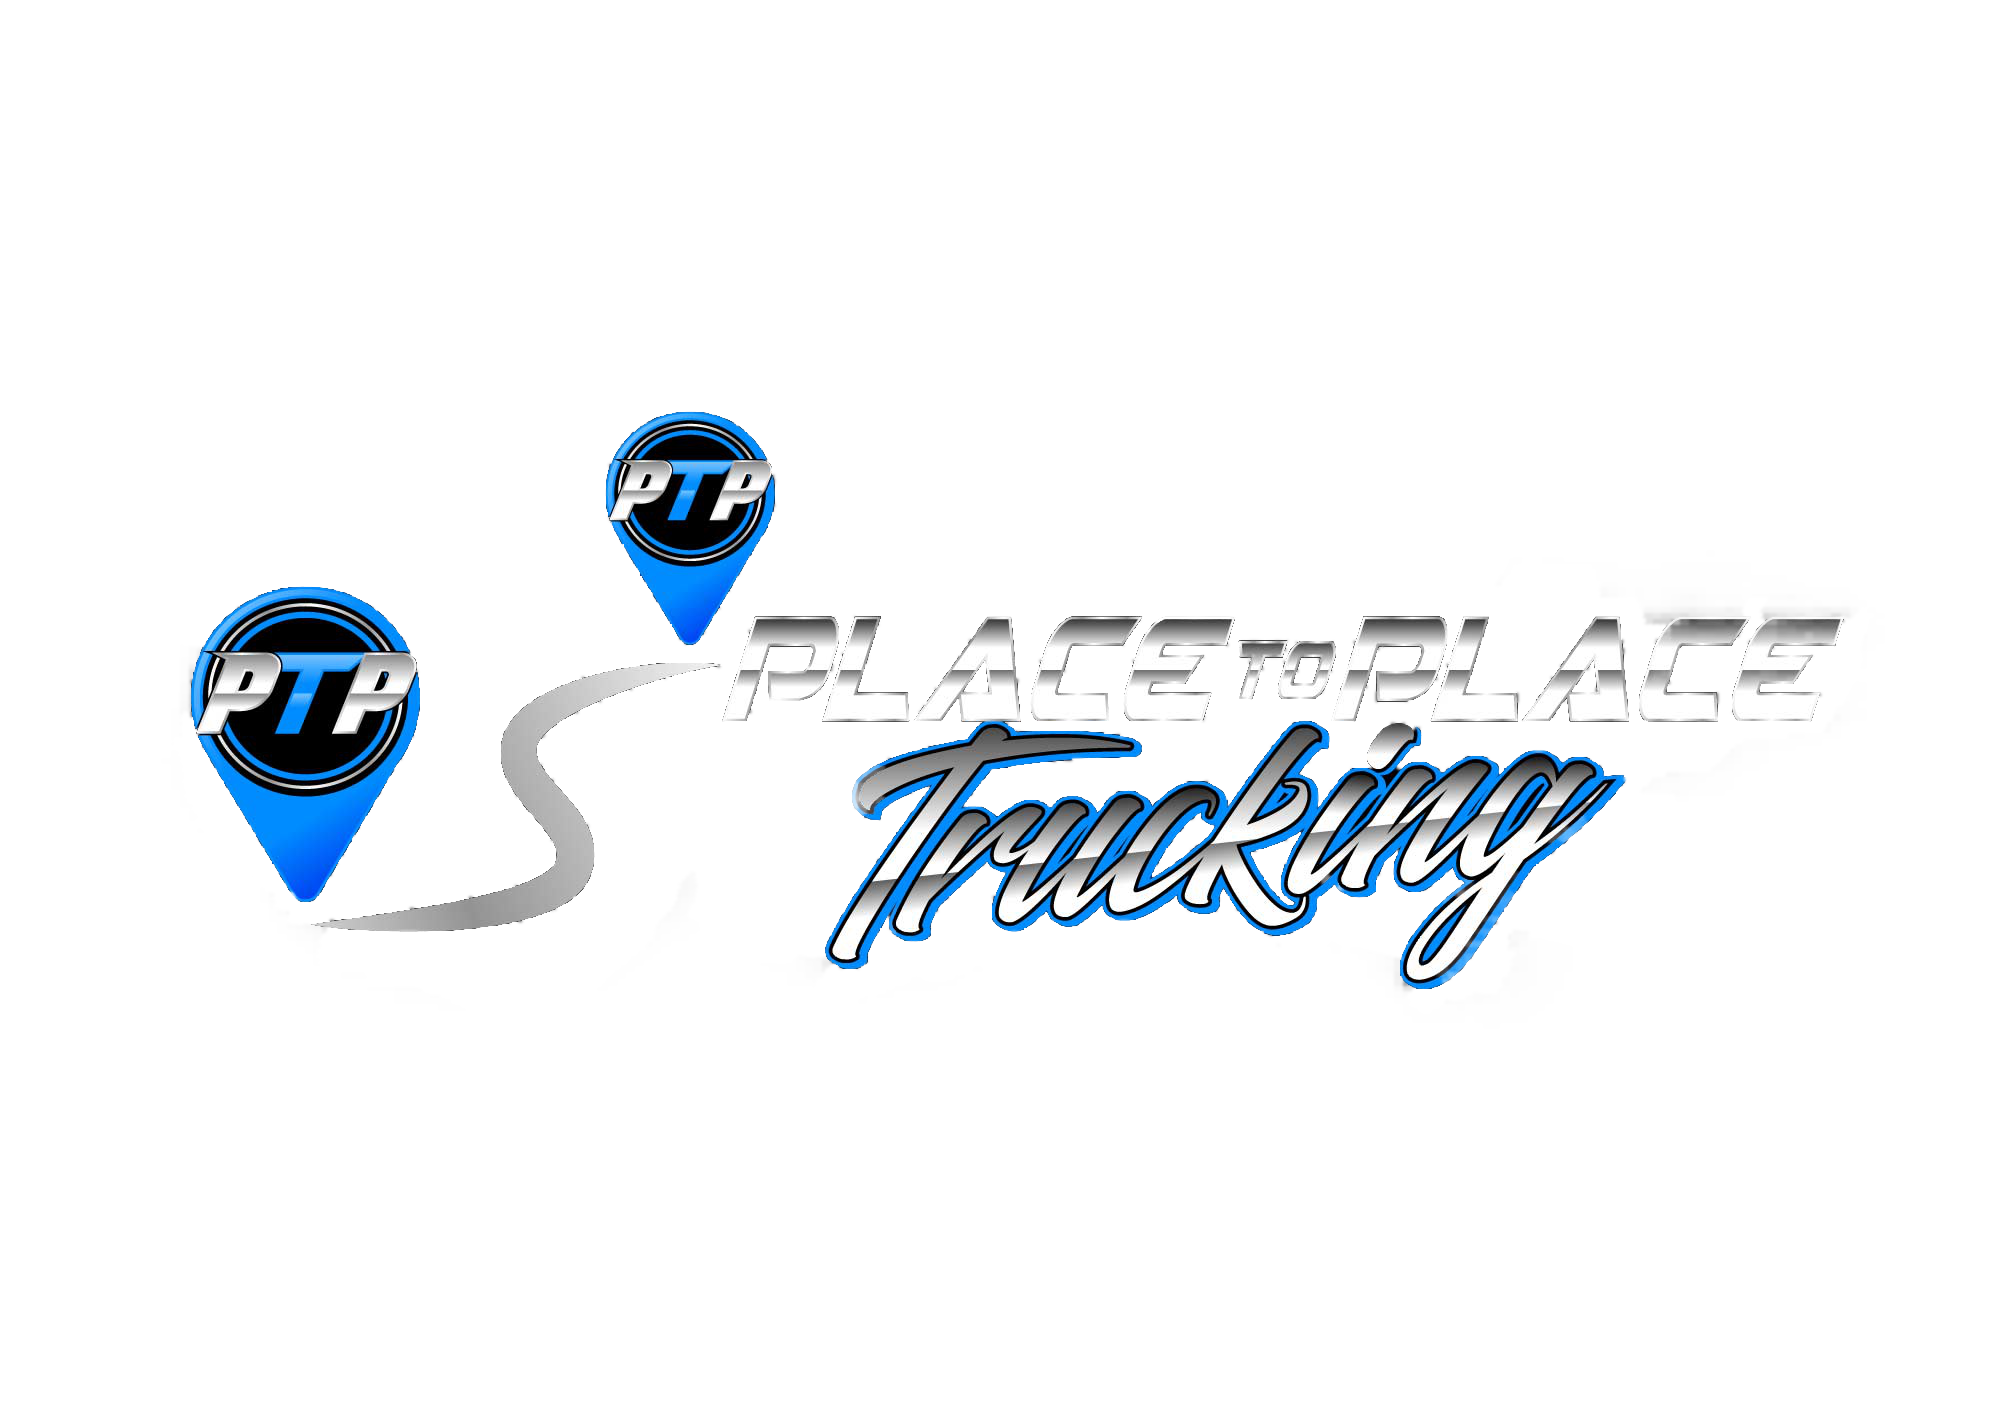 PLACE TO PLACE TRUCKING LTD